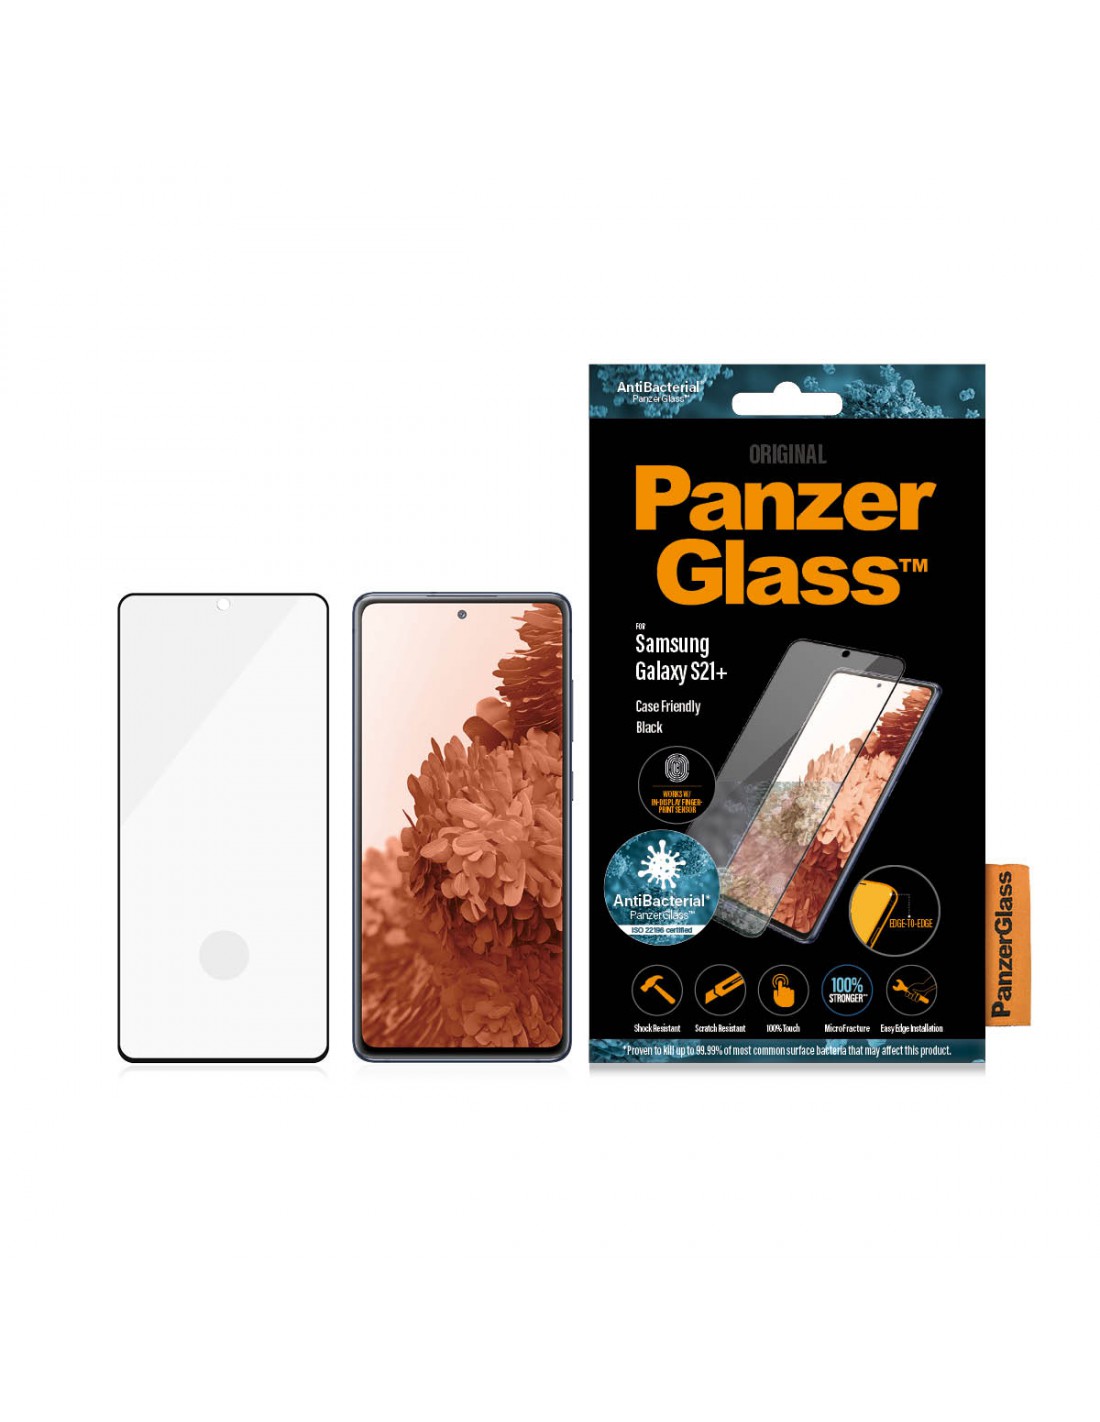 Panzer Glass Screen Protector For Samsung Galaxy S21 + (CASE FRIENDLY)